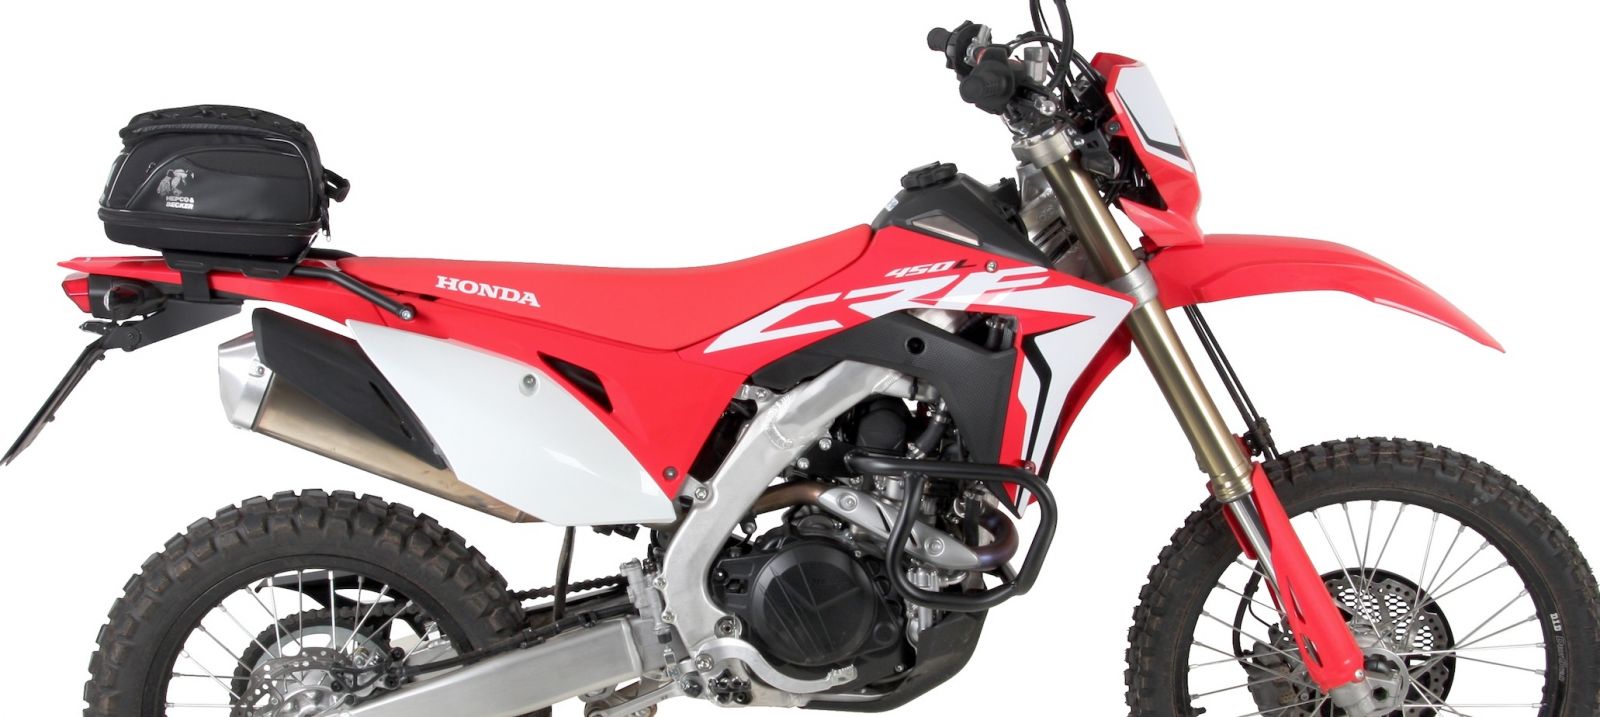 HONDA CRF 450L fitted with luggage, bars and accessories but Hepco&Becker and Motorcycle Adventure Products